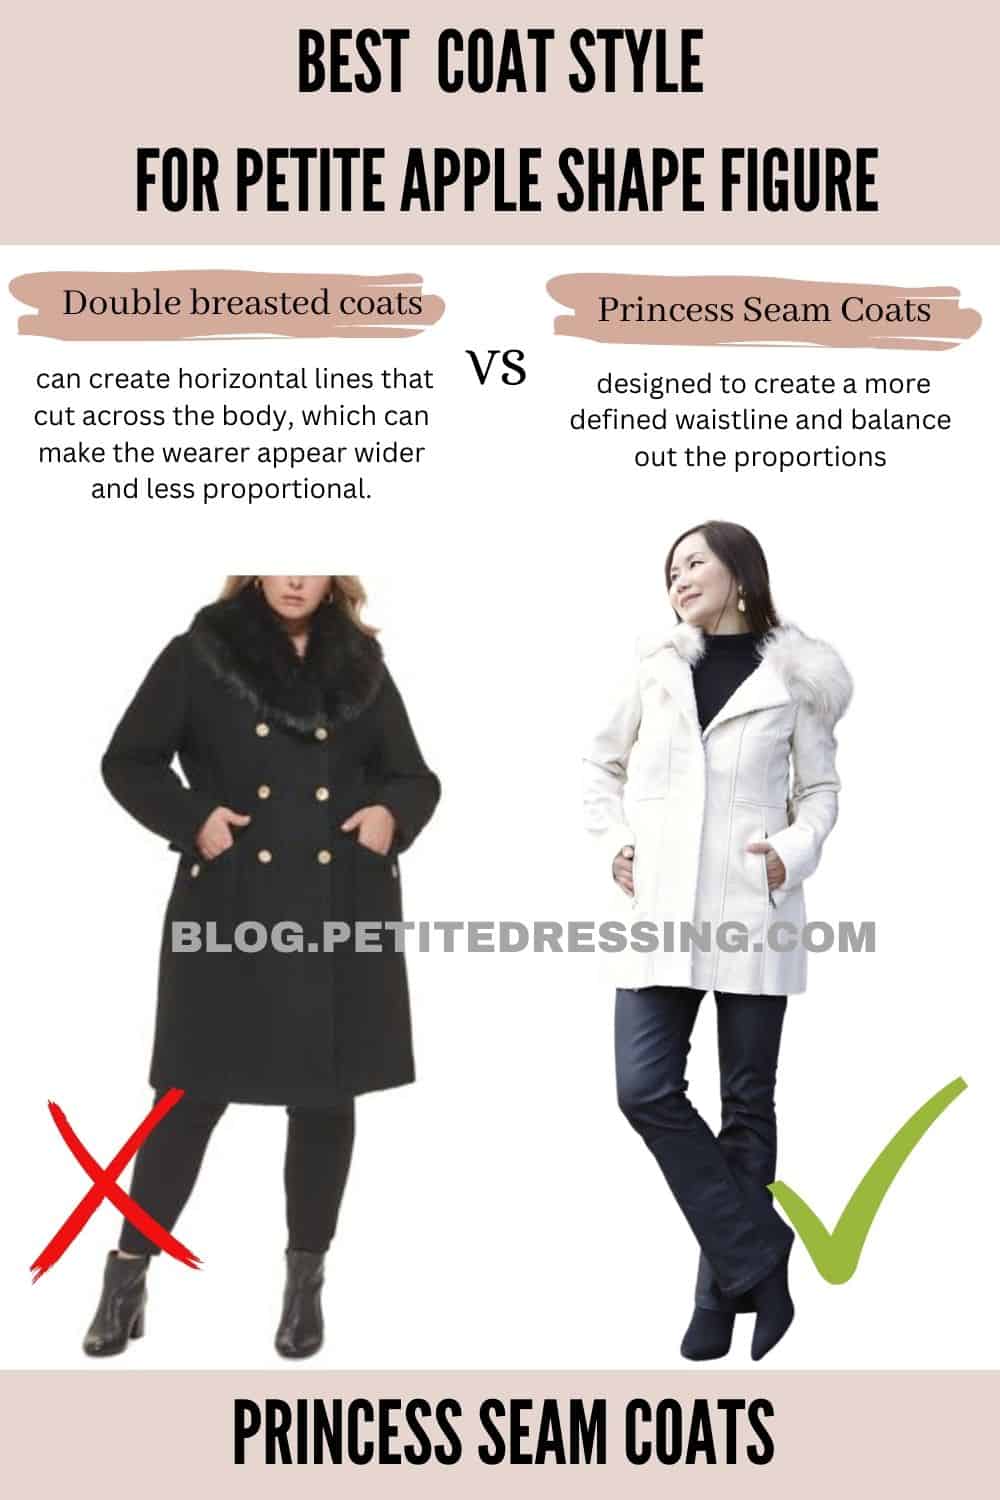 The Complete Coat Style Guide for Petite Apple Shape Figure